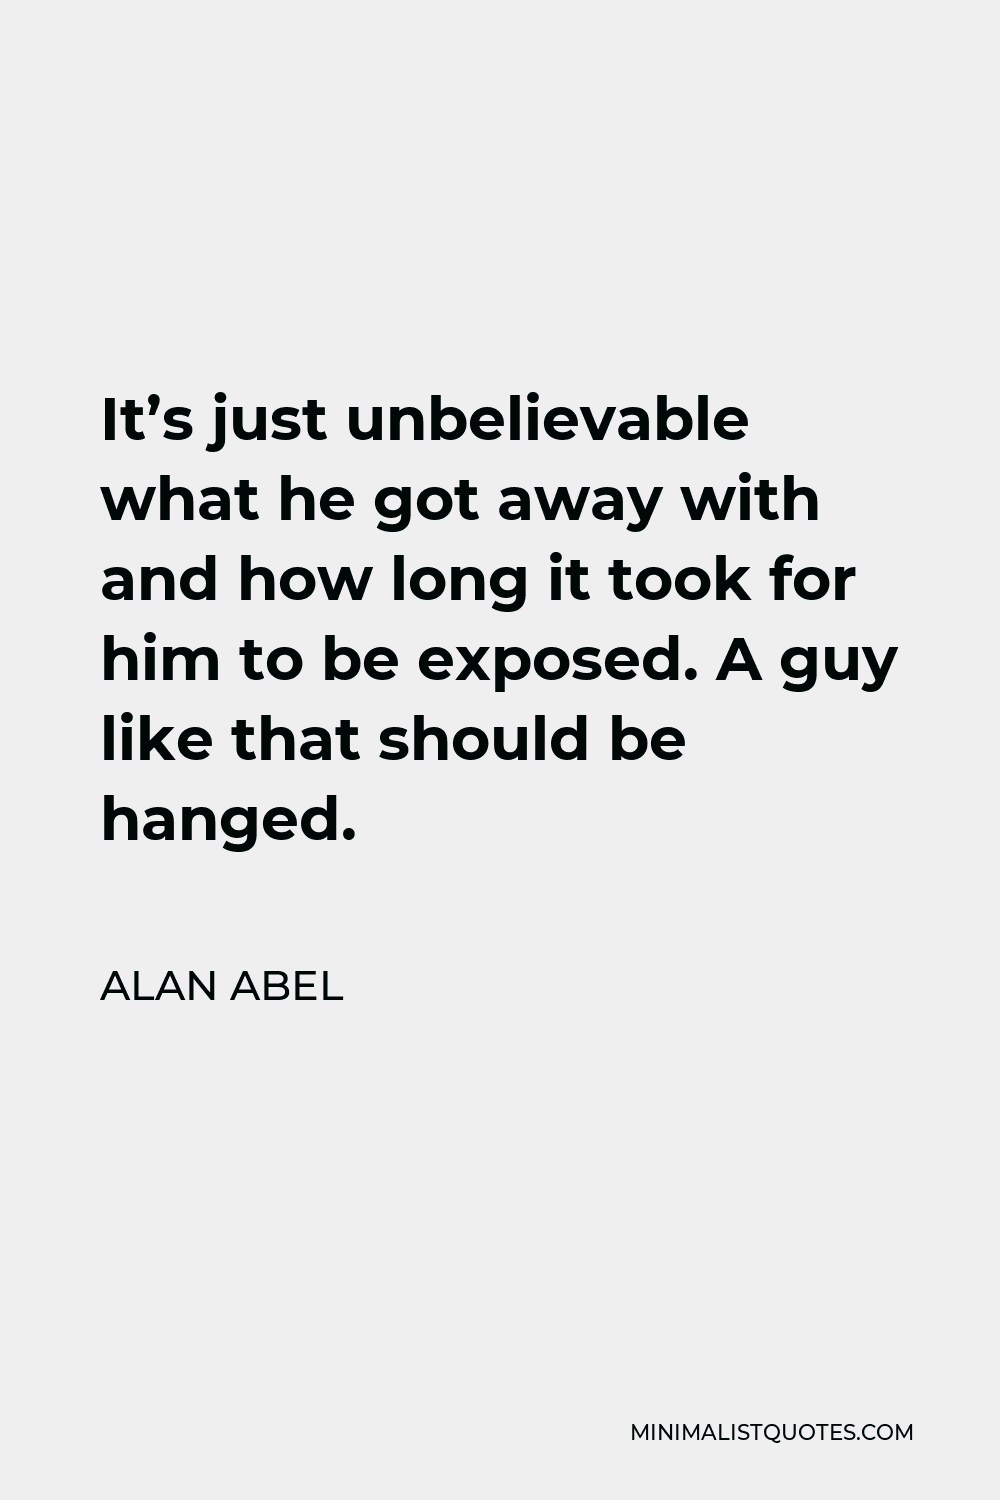 Alan Abel Quote - It’s just unbelievable what he got away with and how long it took for him to be exposed. A guy like that should be hanged.